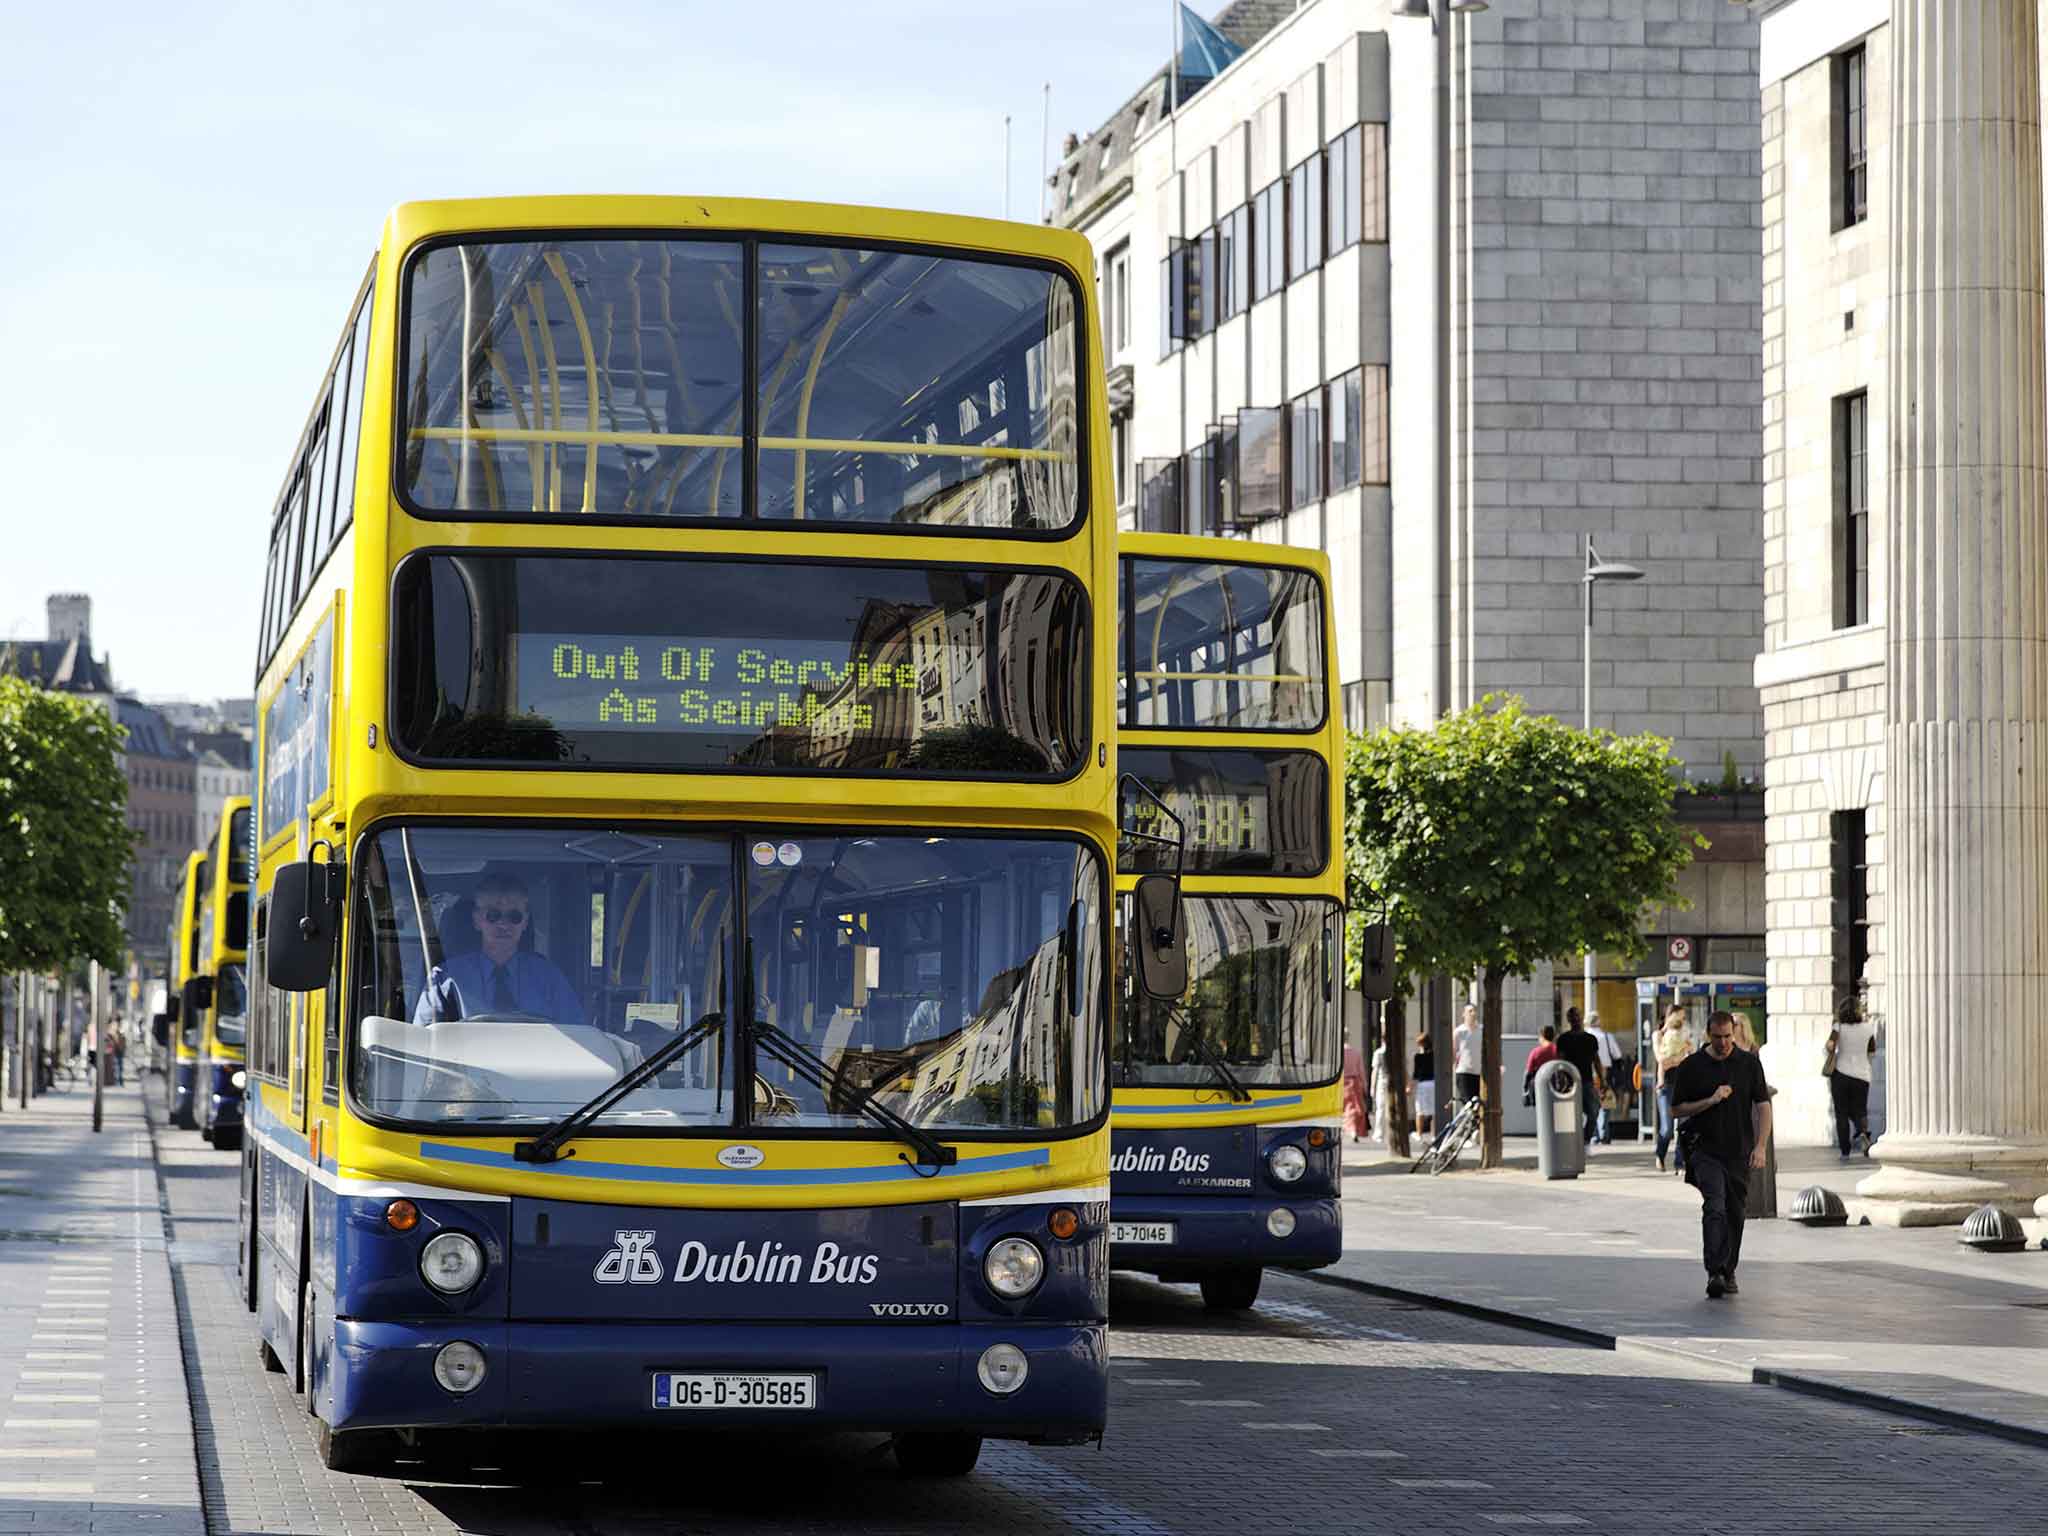 The family were on a Dublin Bus, a major public transport provider in the capital